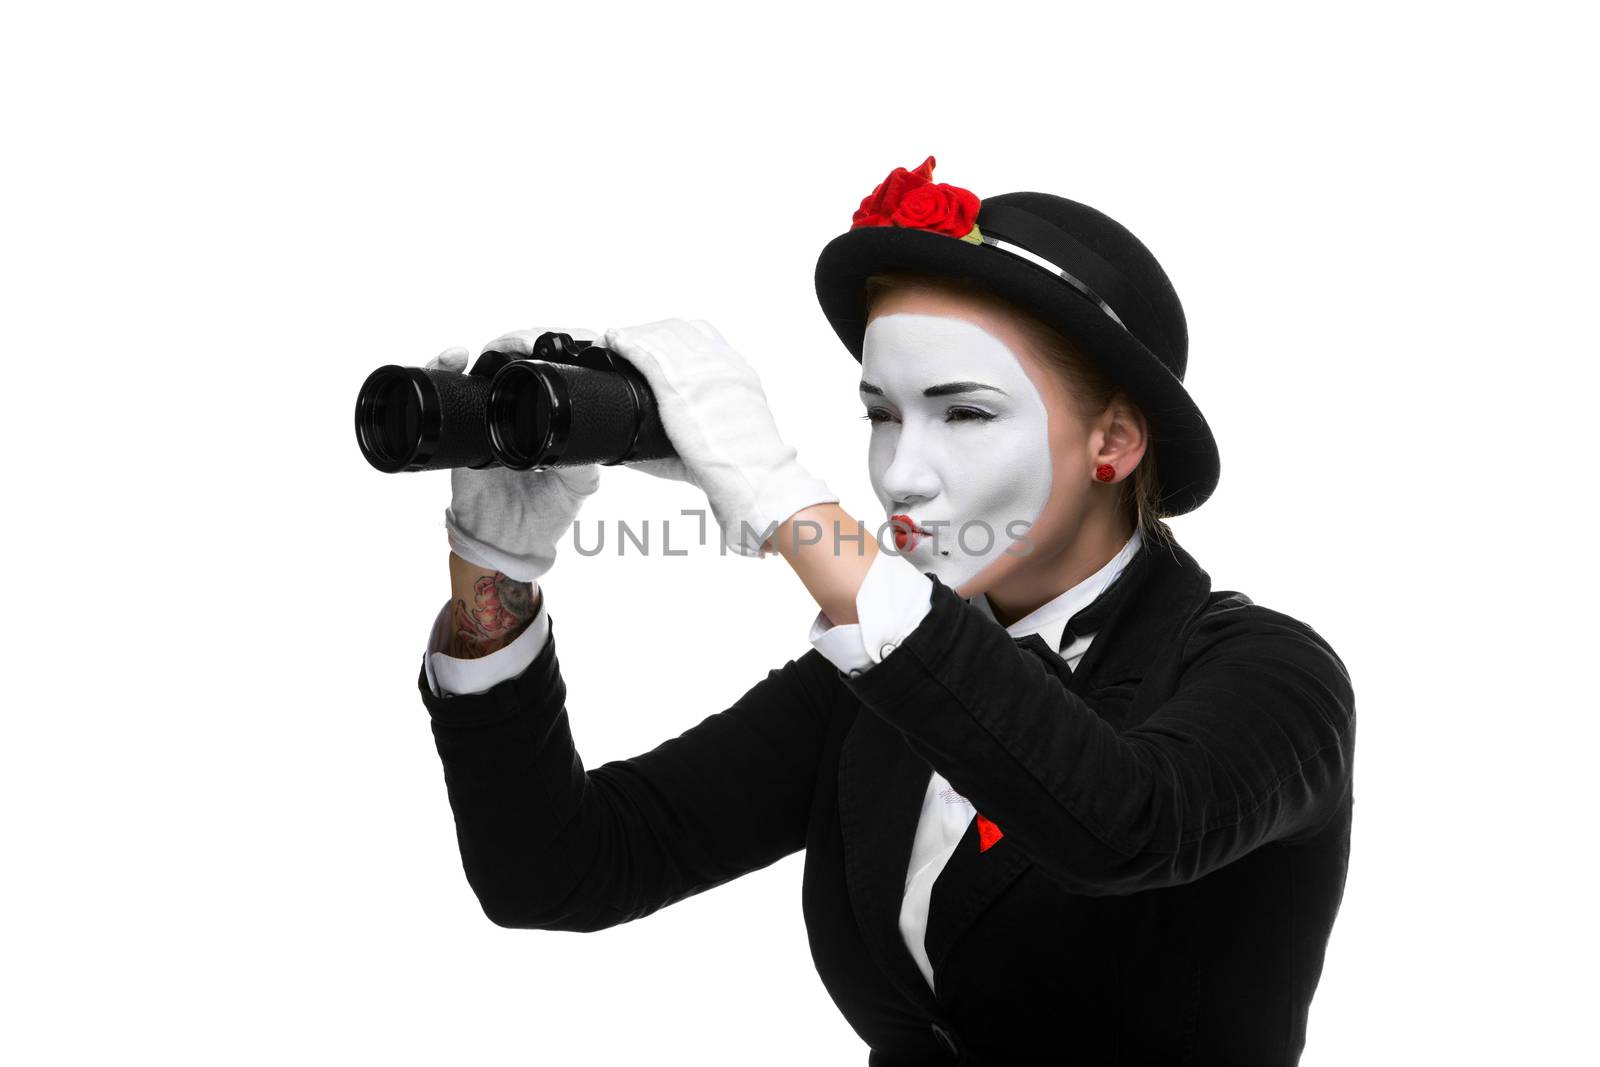 Portrait of the searching woman as mime with binoculars isolated on white background. Concept intense search